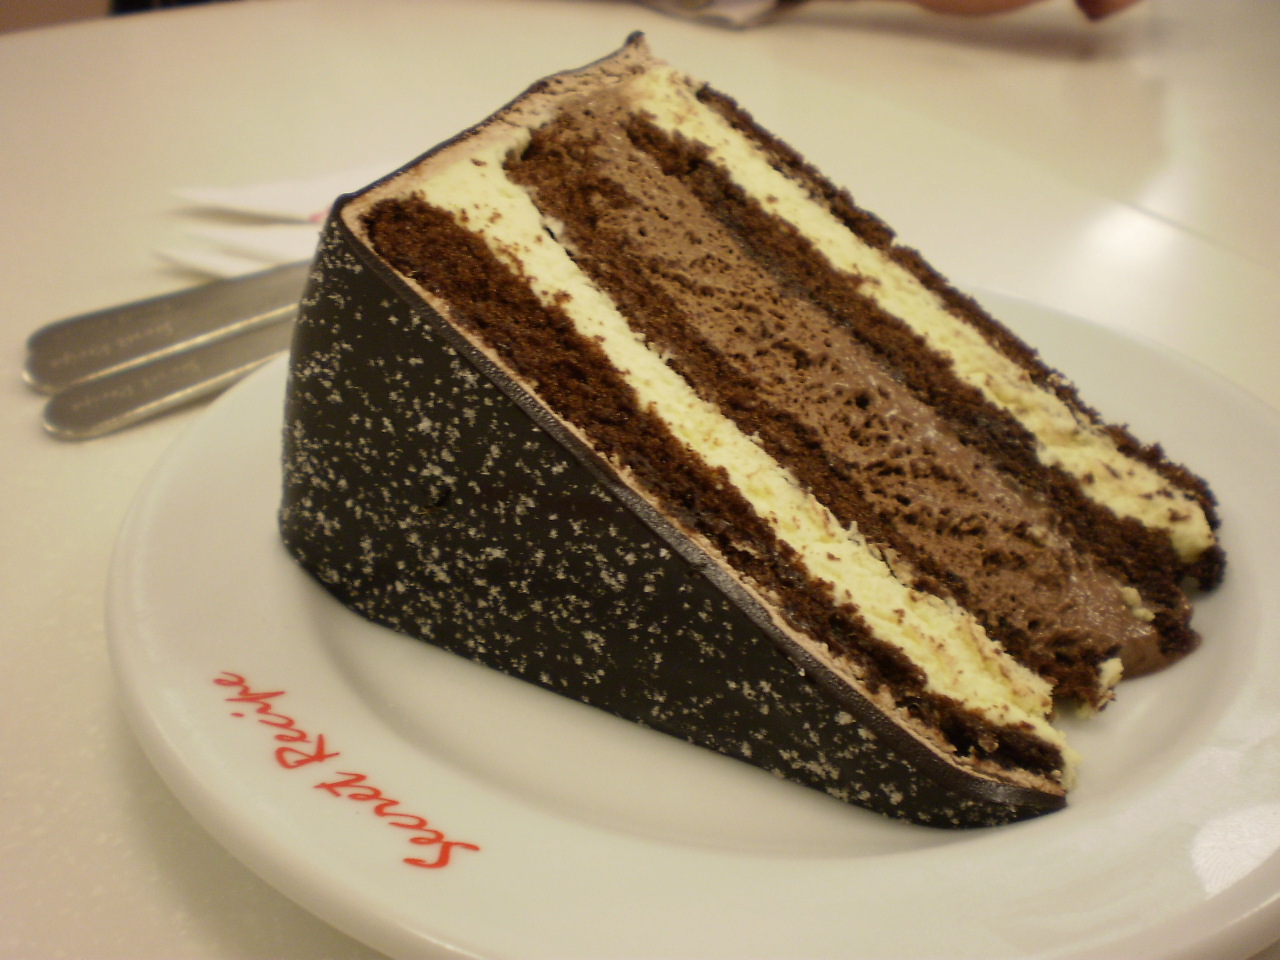 slice of the cake Chocolate Indulgence cost Rs 165. It was as good ...